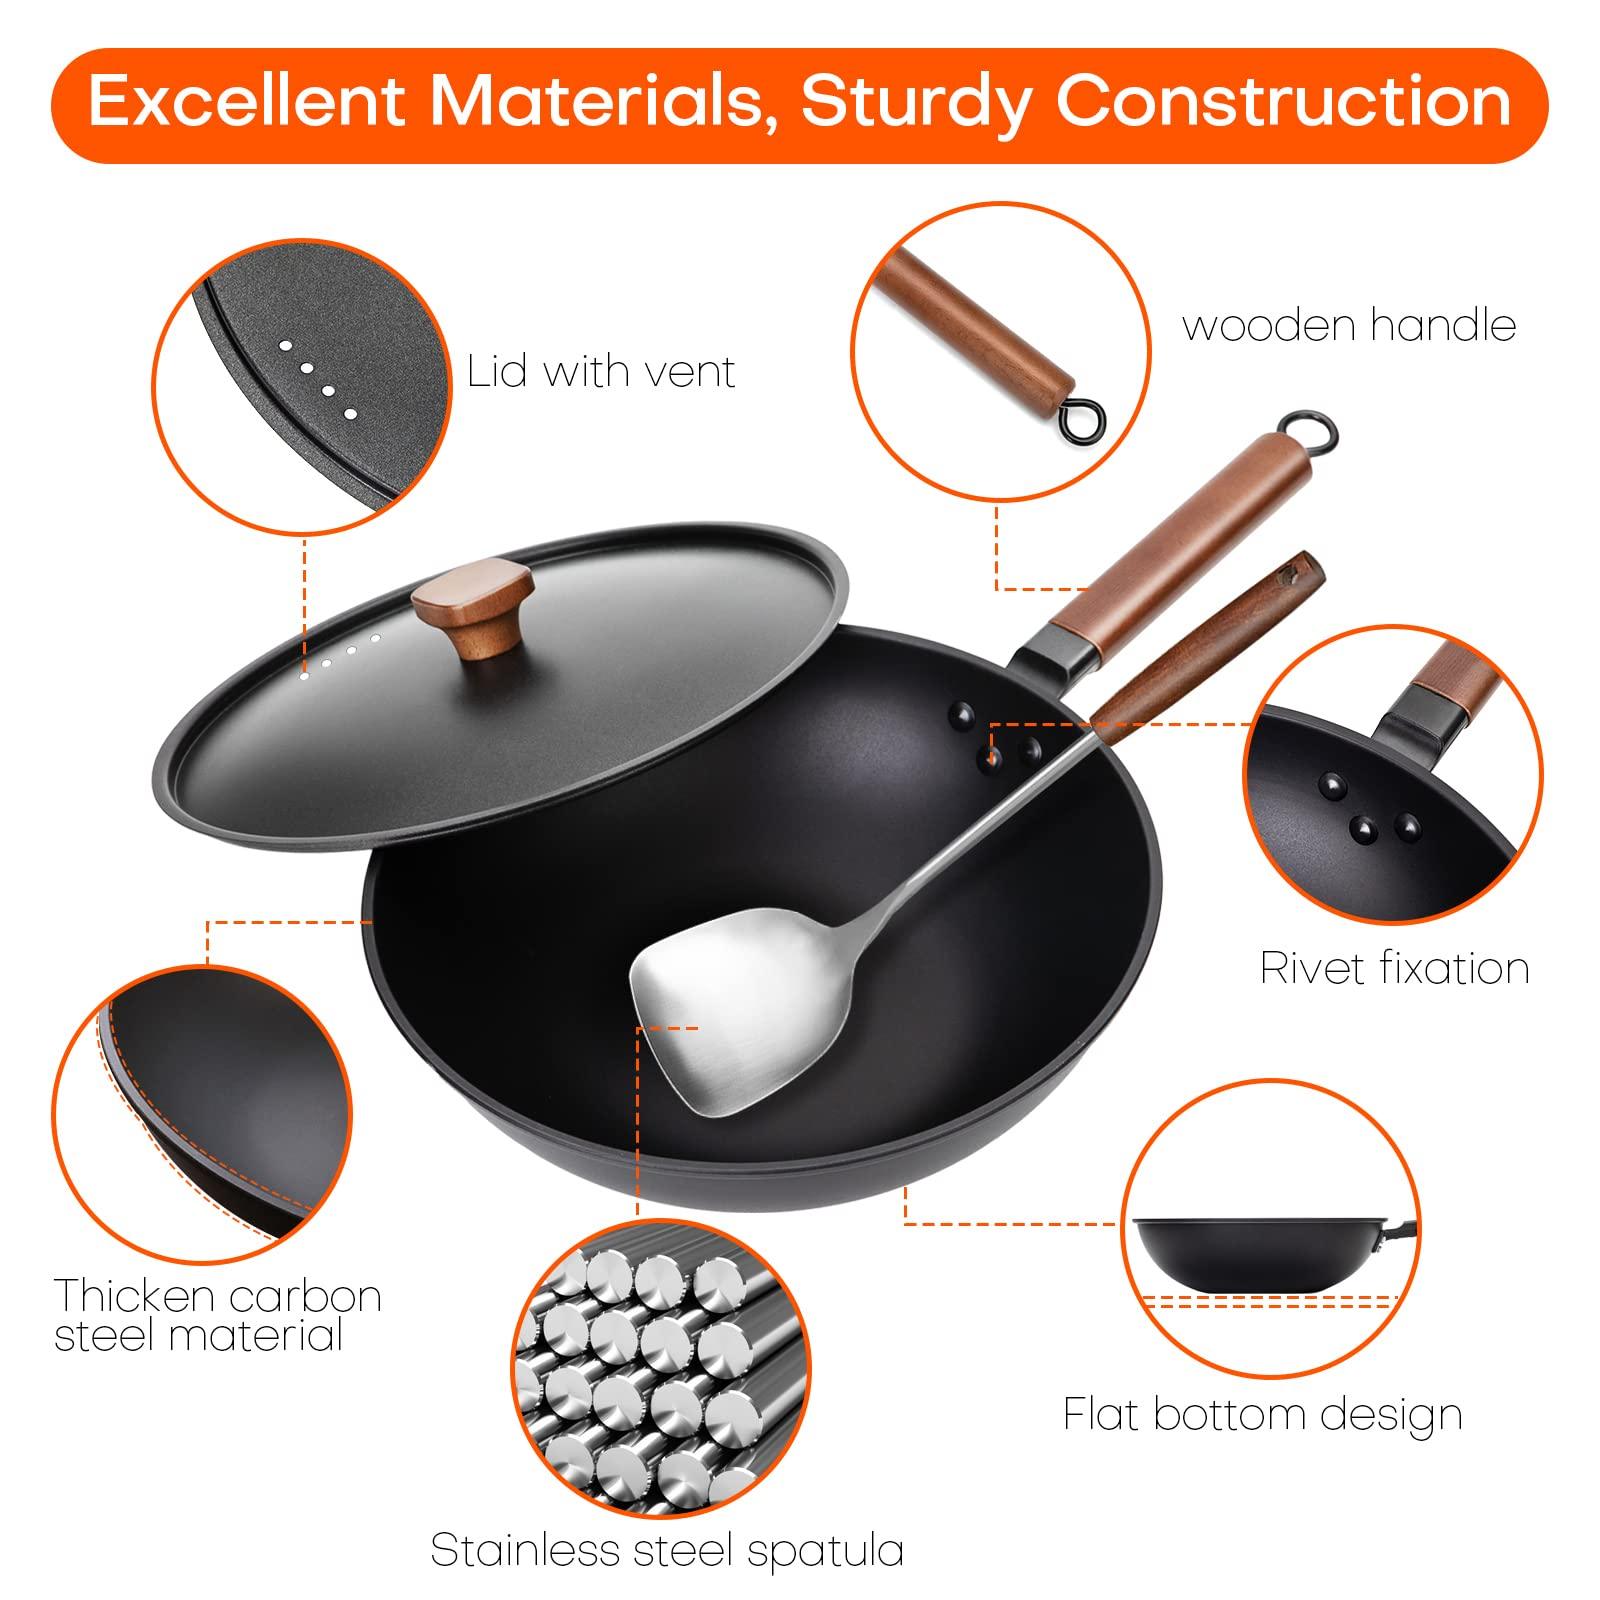 Eleulife Carbon Steel Wok, 13 Inch Wok Pan with Lid and Spatula, Nonstick Woks and Stir-fry Pans, No Chemical Coated Flat Bottom Chinese Wok for Induction, Electric, Gas, All Stoves - CookCave